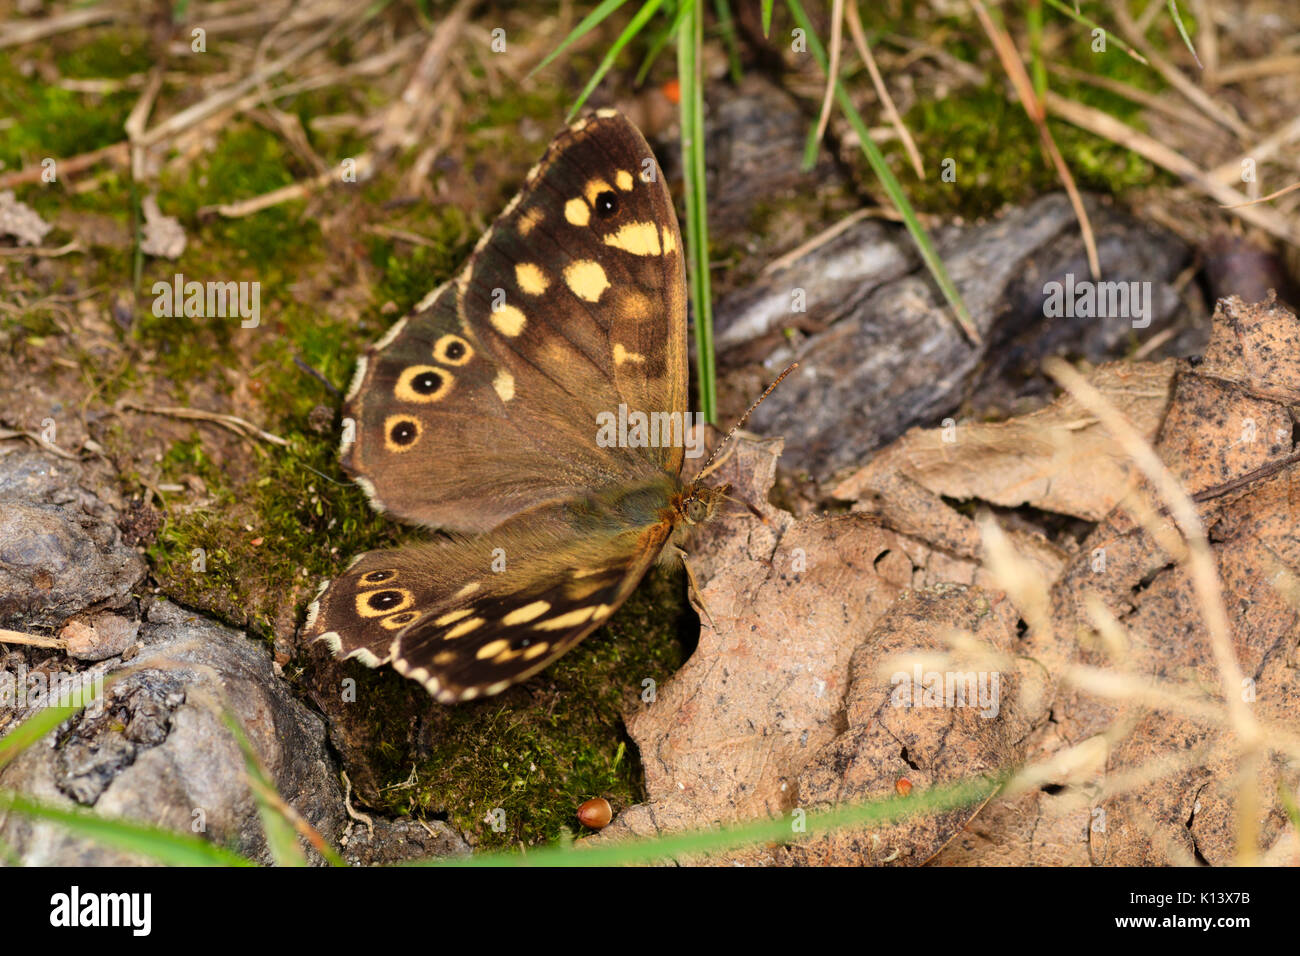 Speckled wood butterfly, Pararge aegeria, at rest and camouflaged among fallen leaves in a wood Stock Photo